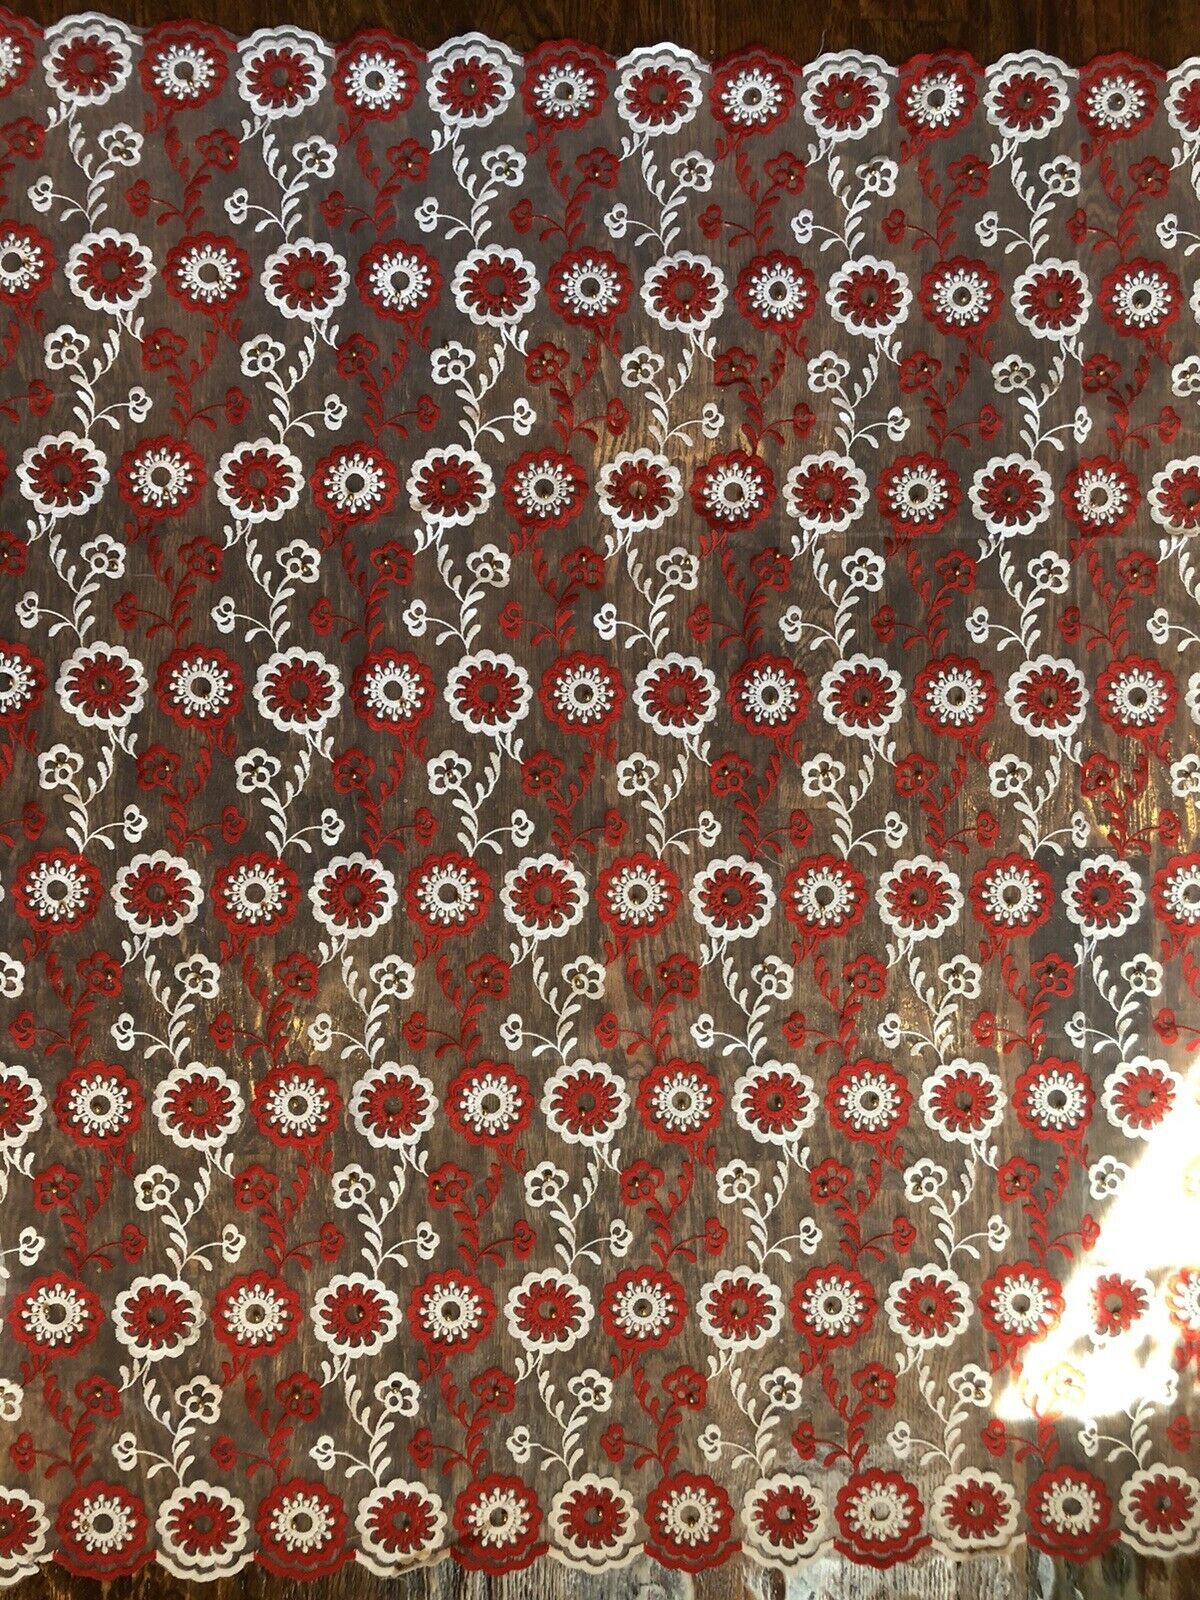 Red and White Floral Embroidered Lace Fabric with Rhinestones